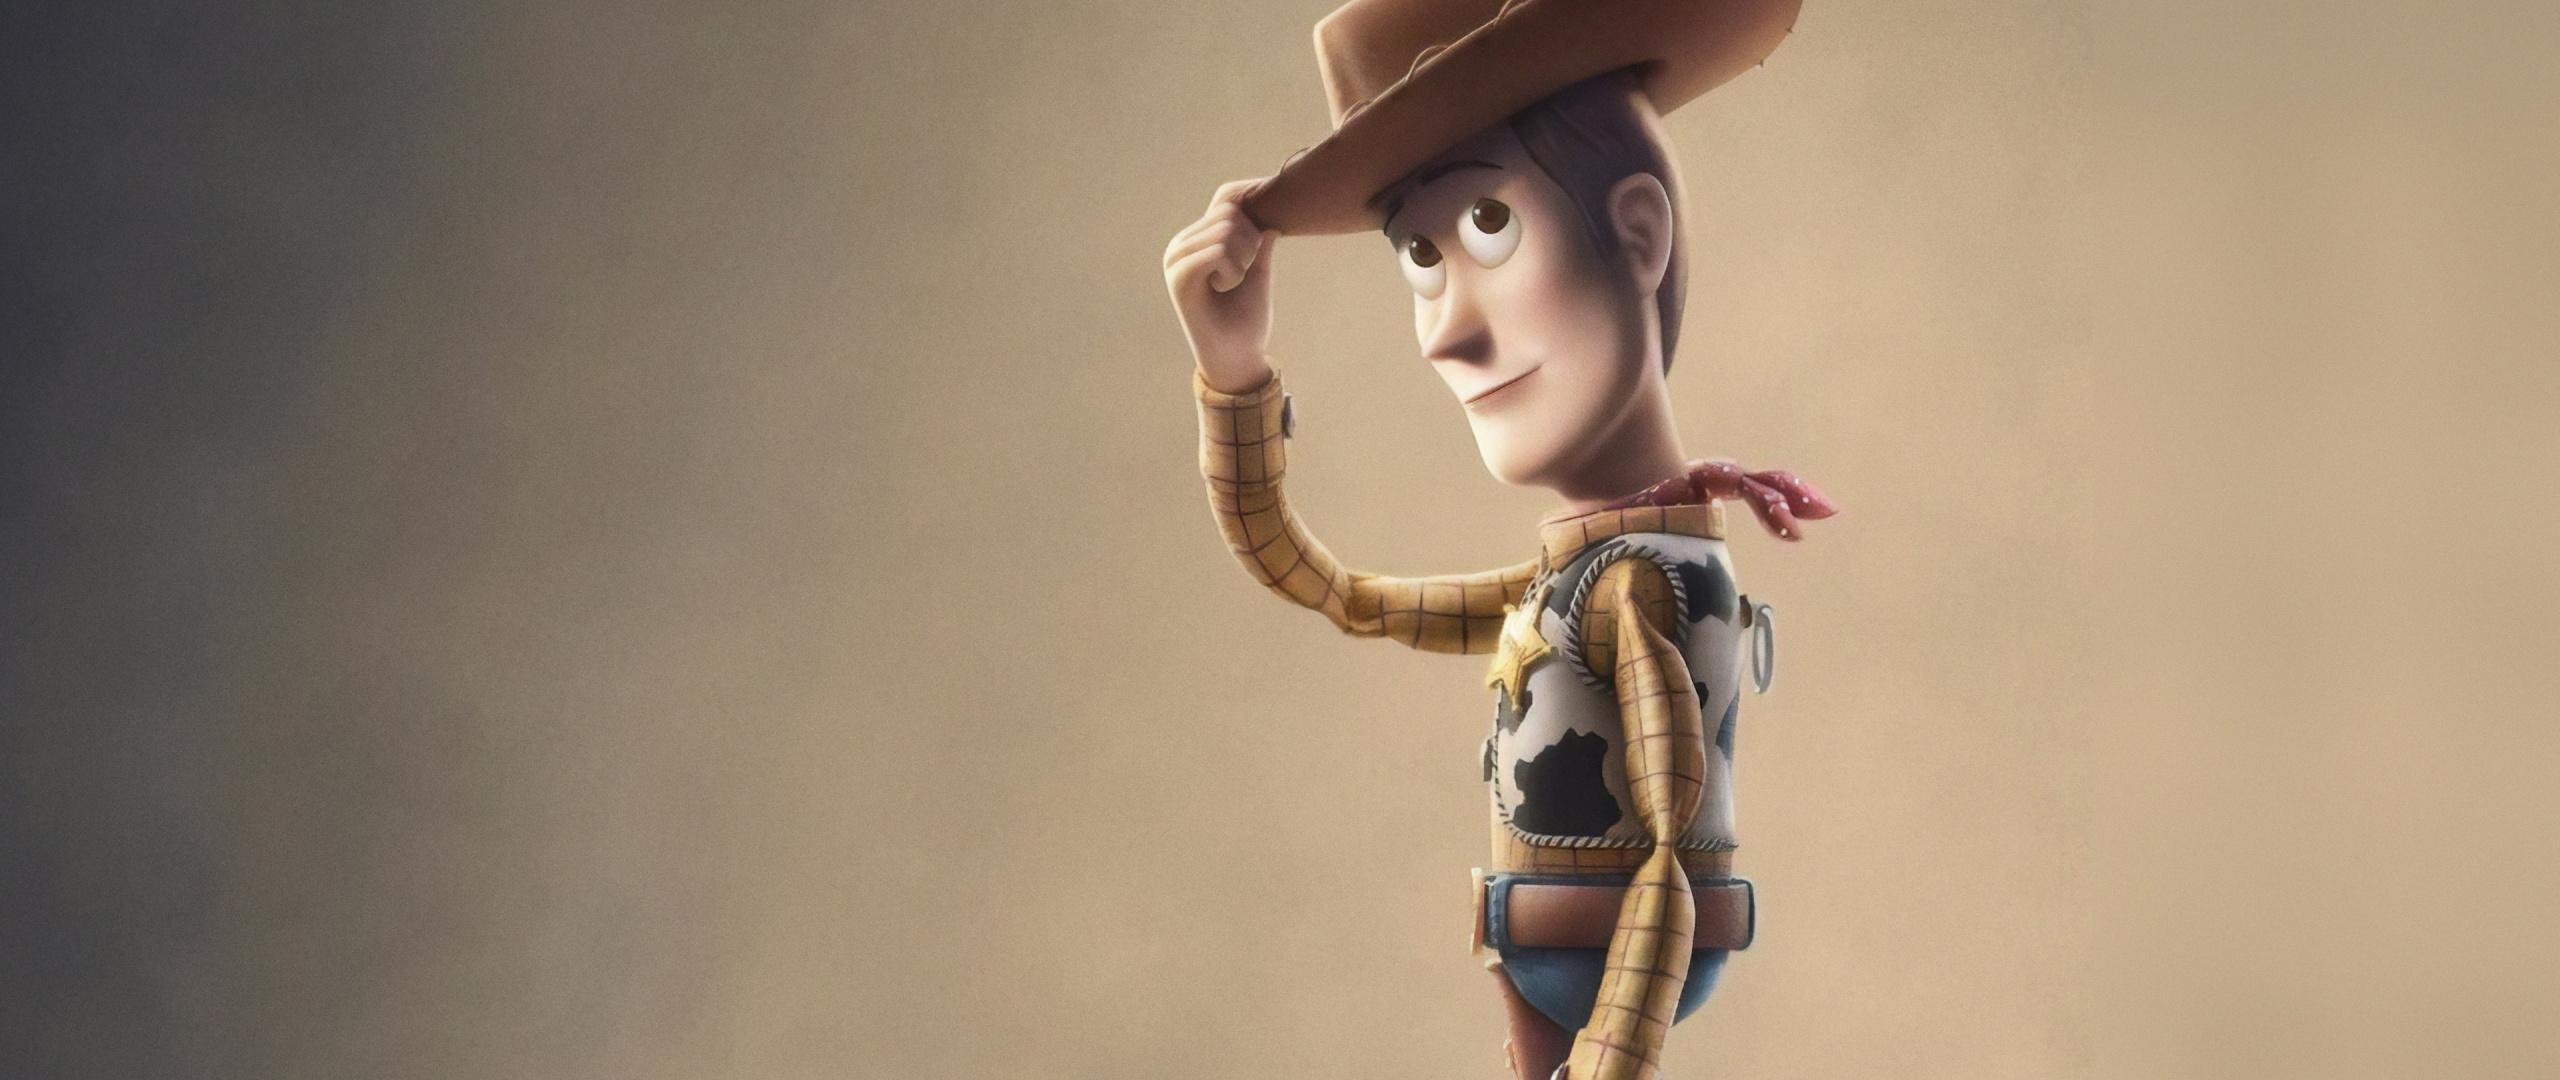 Download 2560x1080 wallpaper toy story woody, animation movie